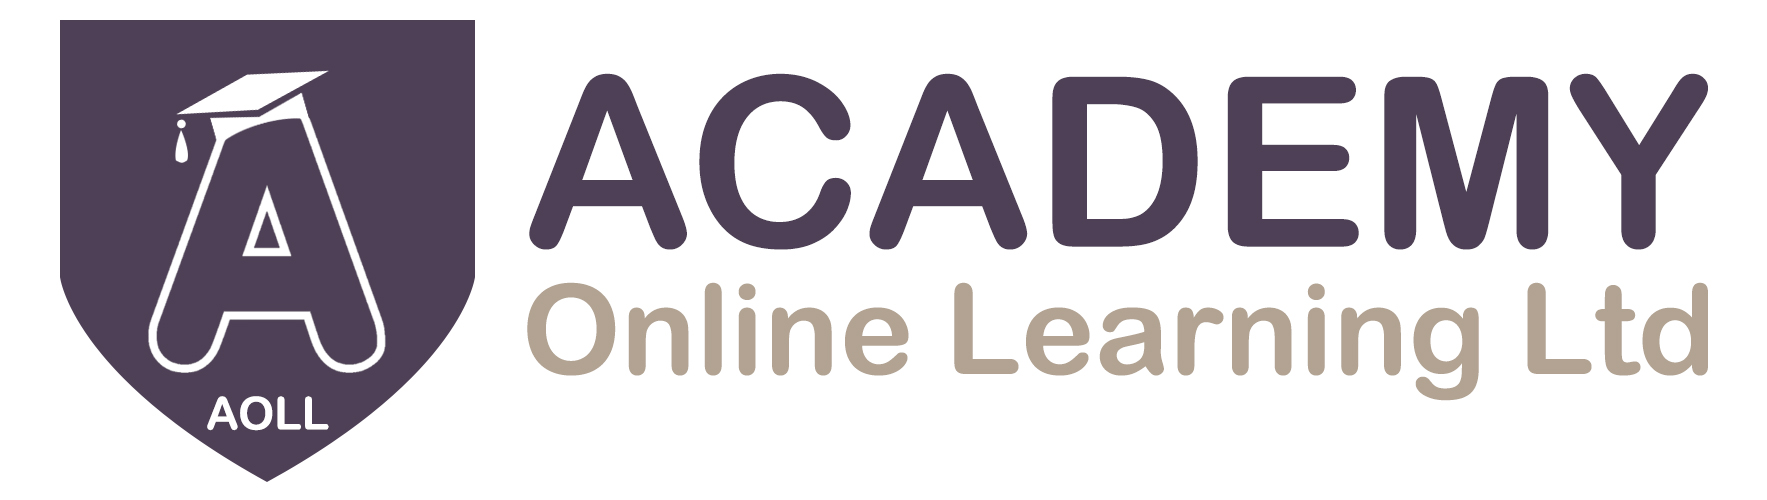 Academy Online Learning